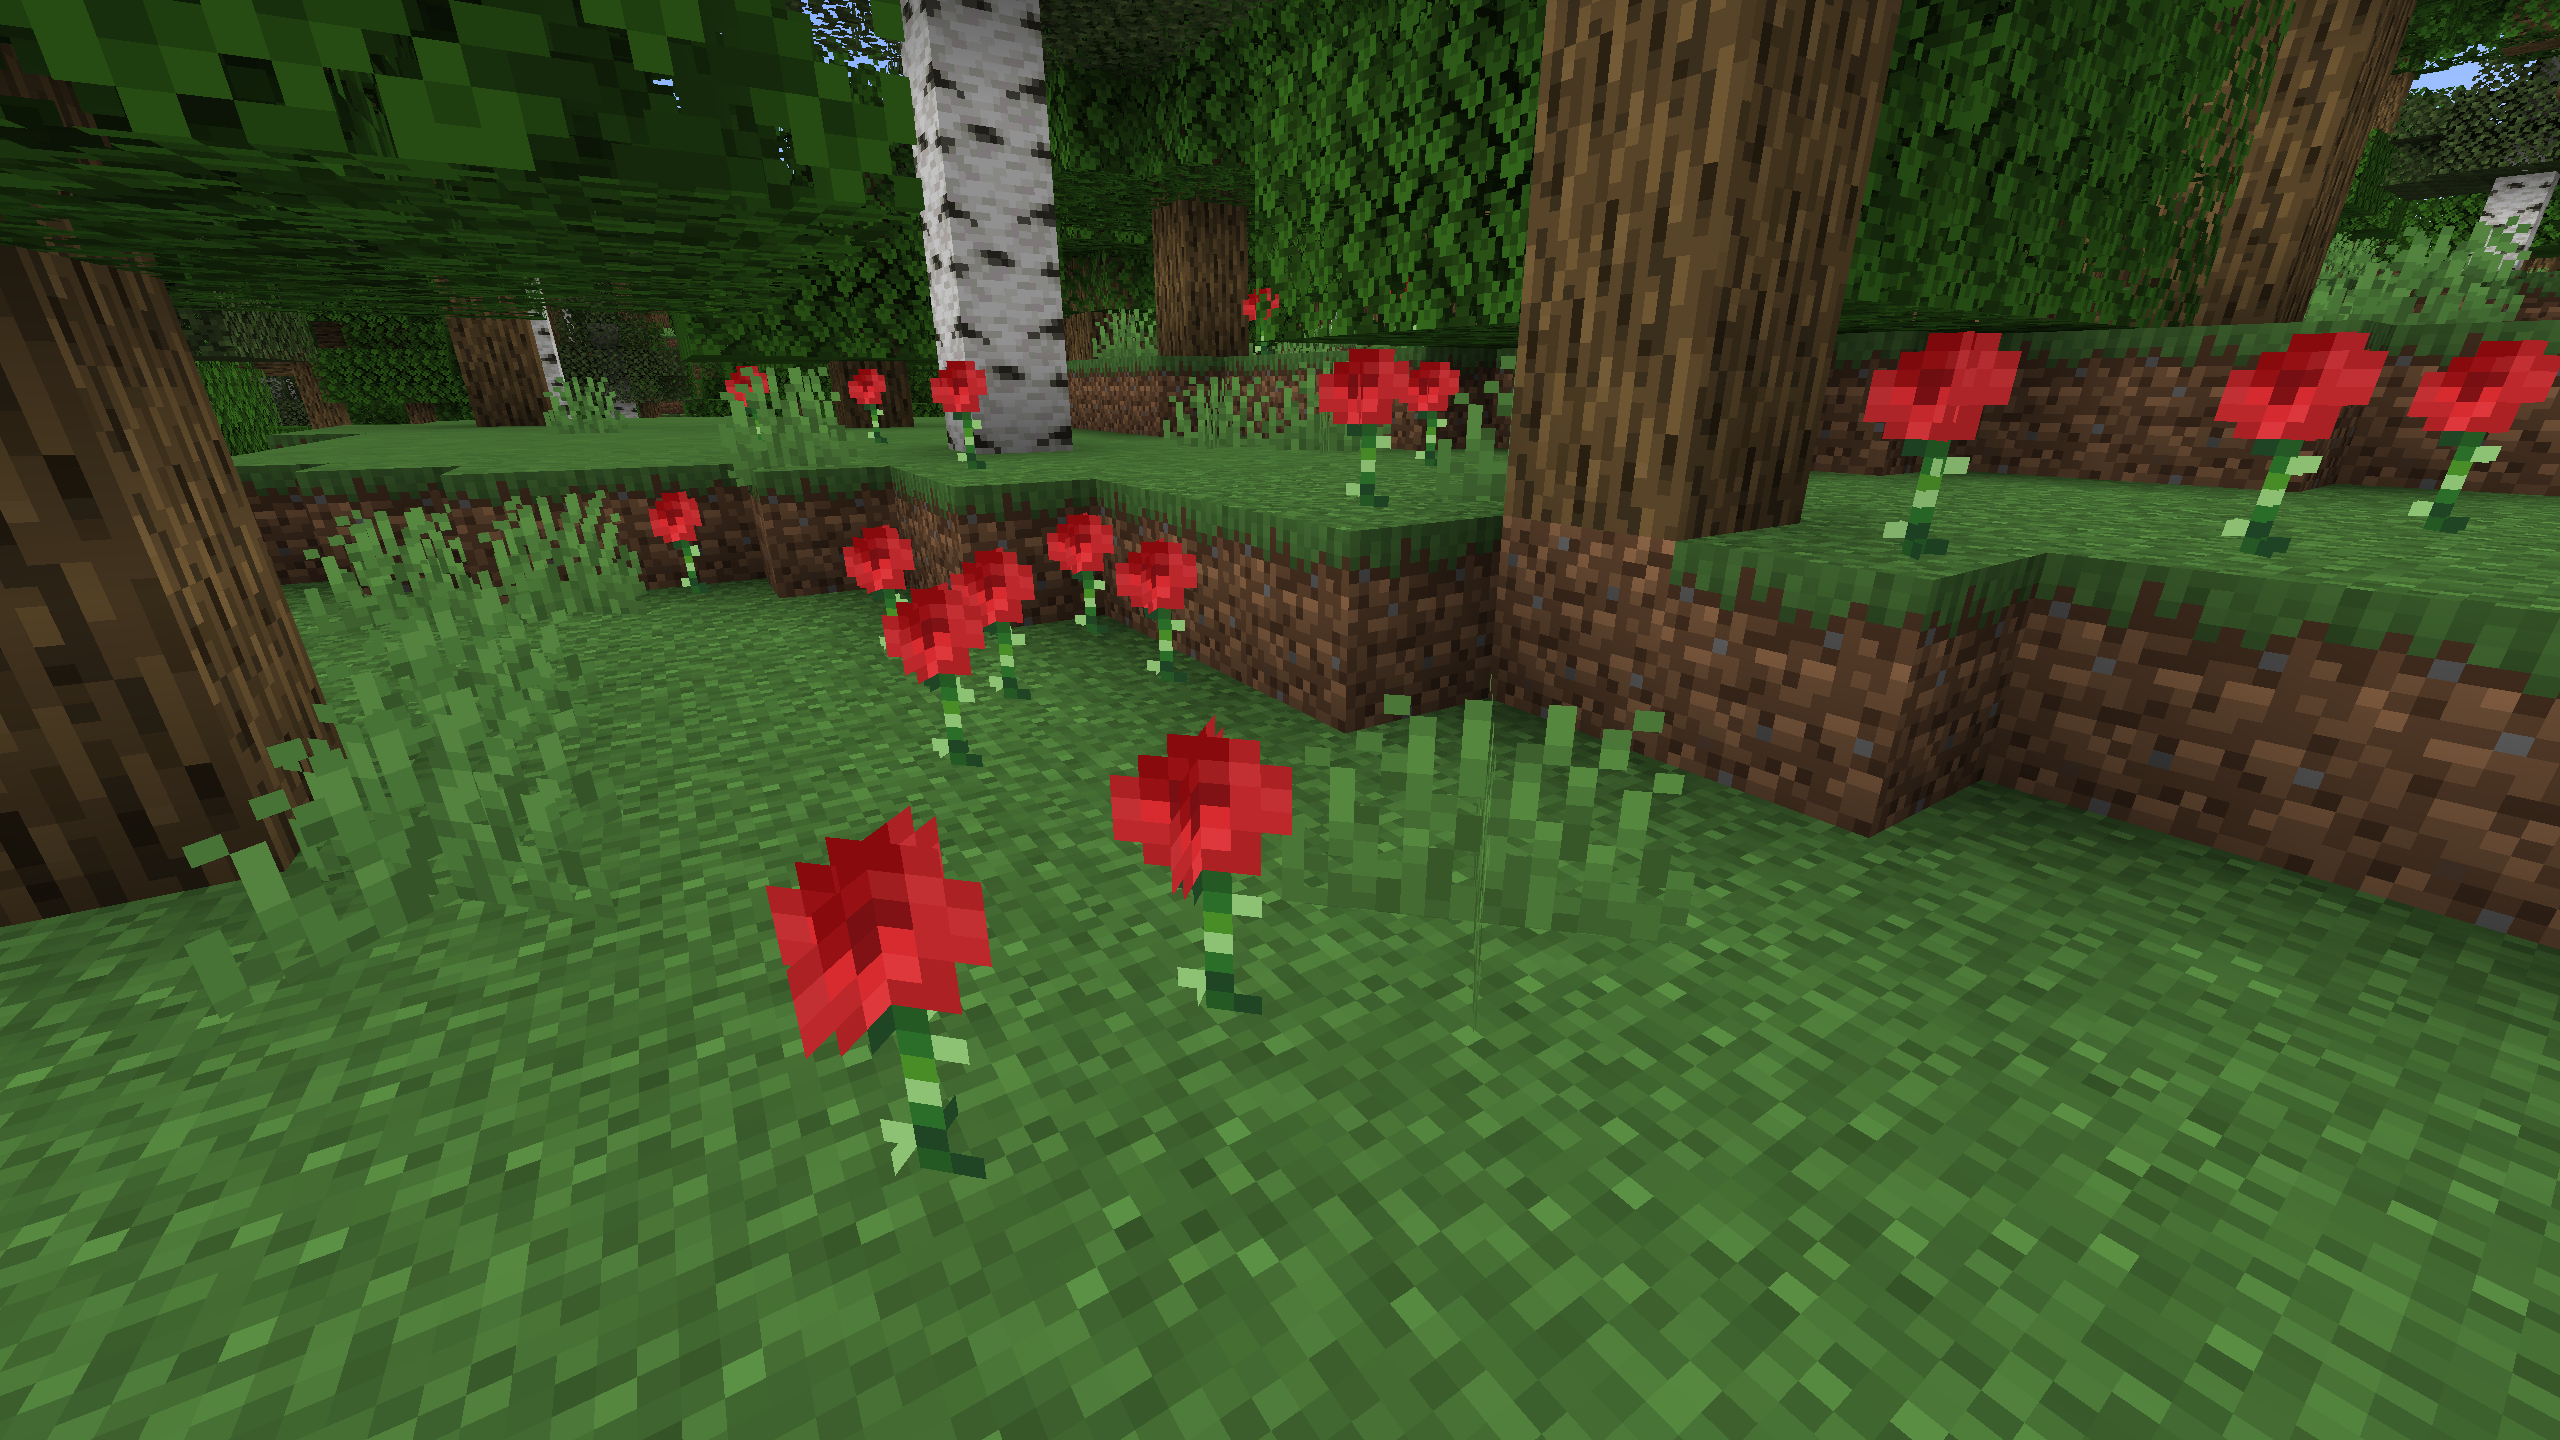 A wild patch of roses!